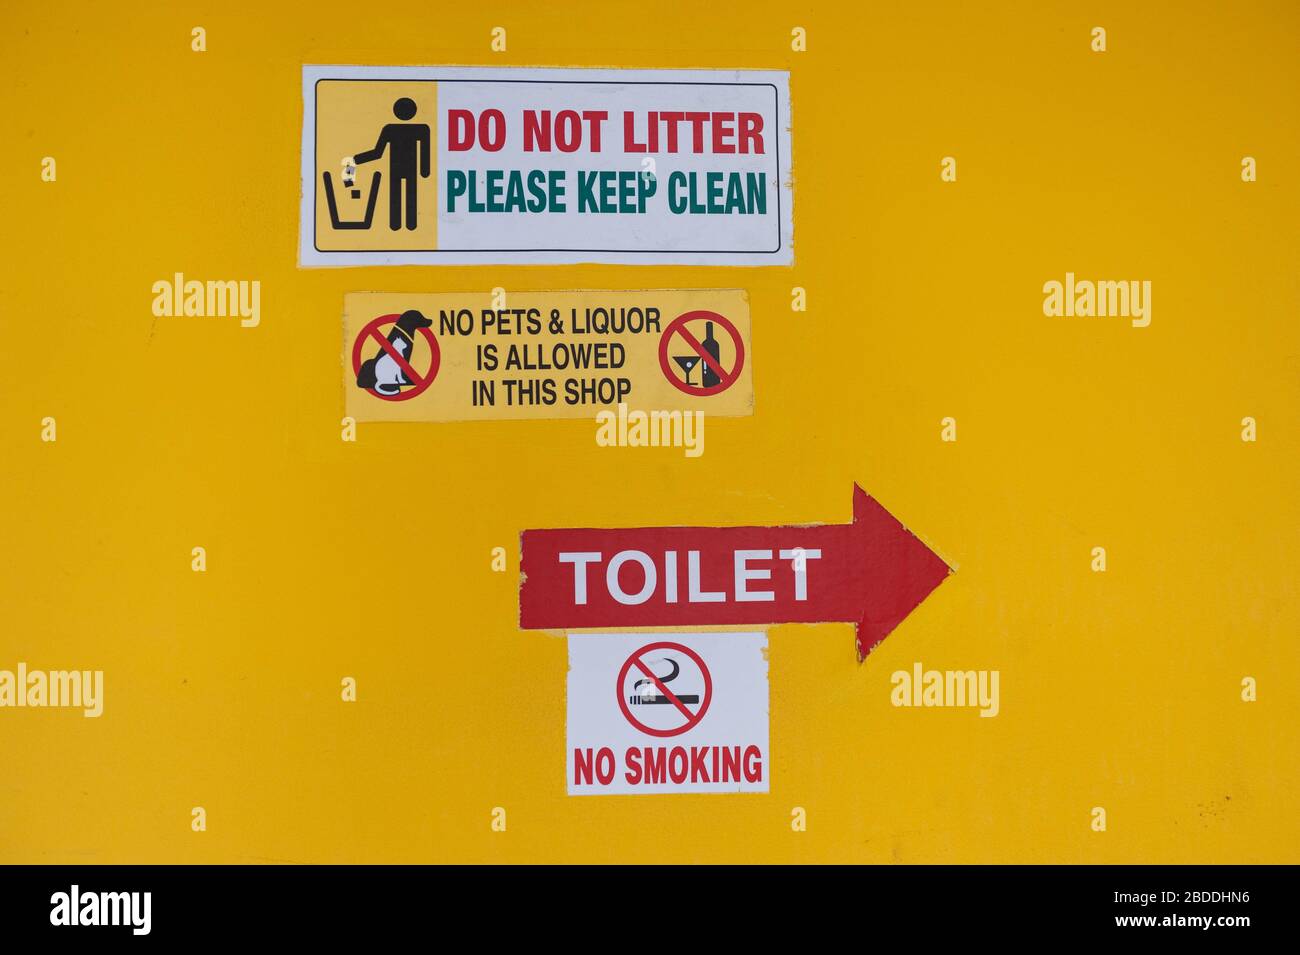 18.07.2019, Singapore, , Singapore - Various prohibition signs and stickers with notices stick to a yellow house wall in the Muslim quarter. 0SL190718 Stock Photo